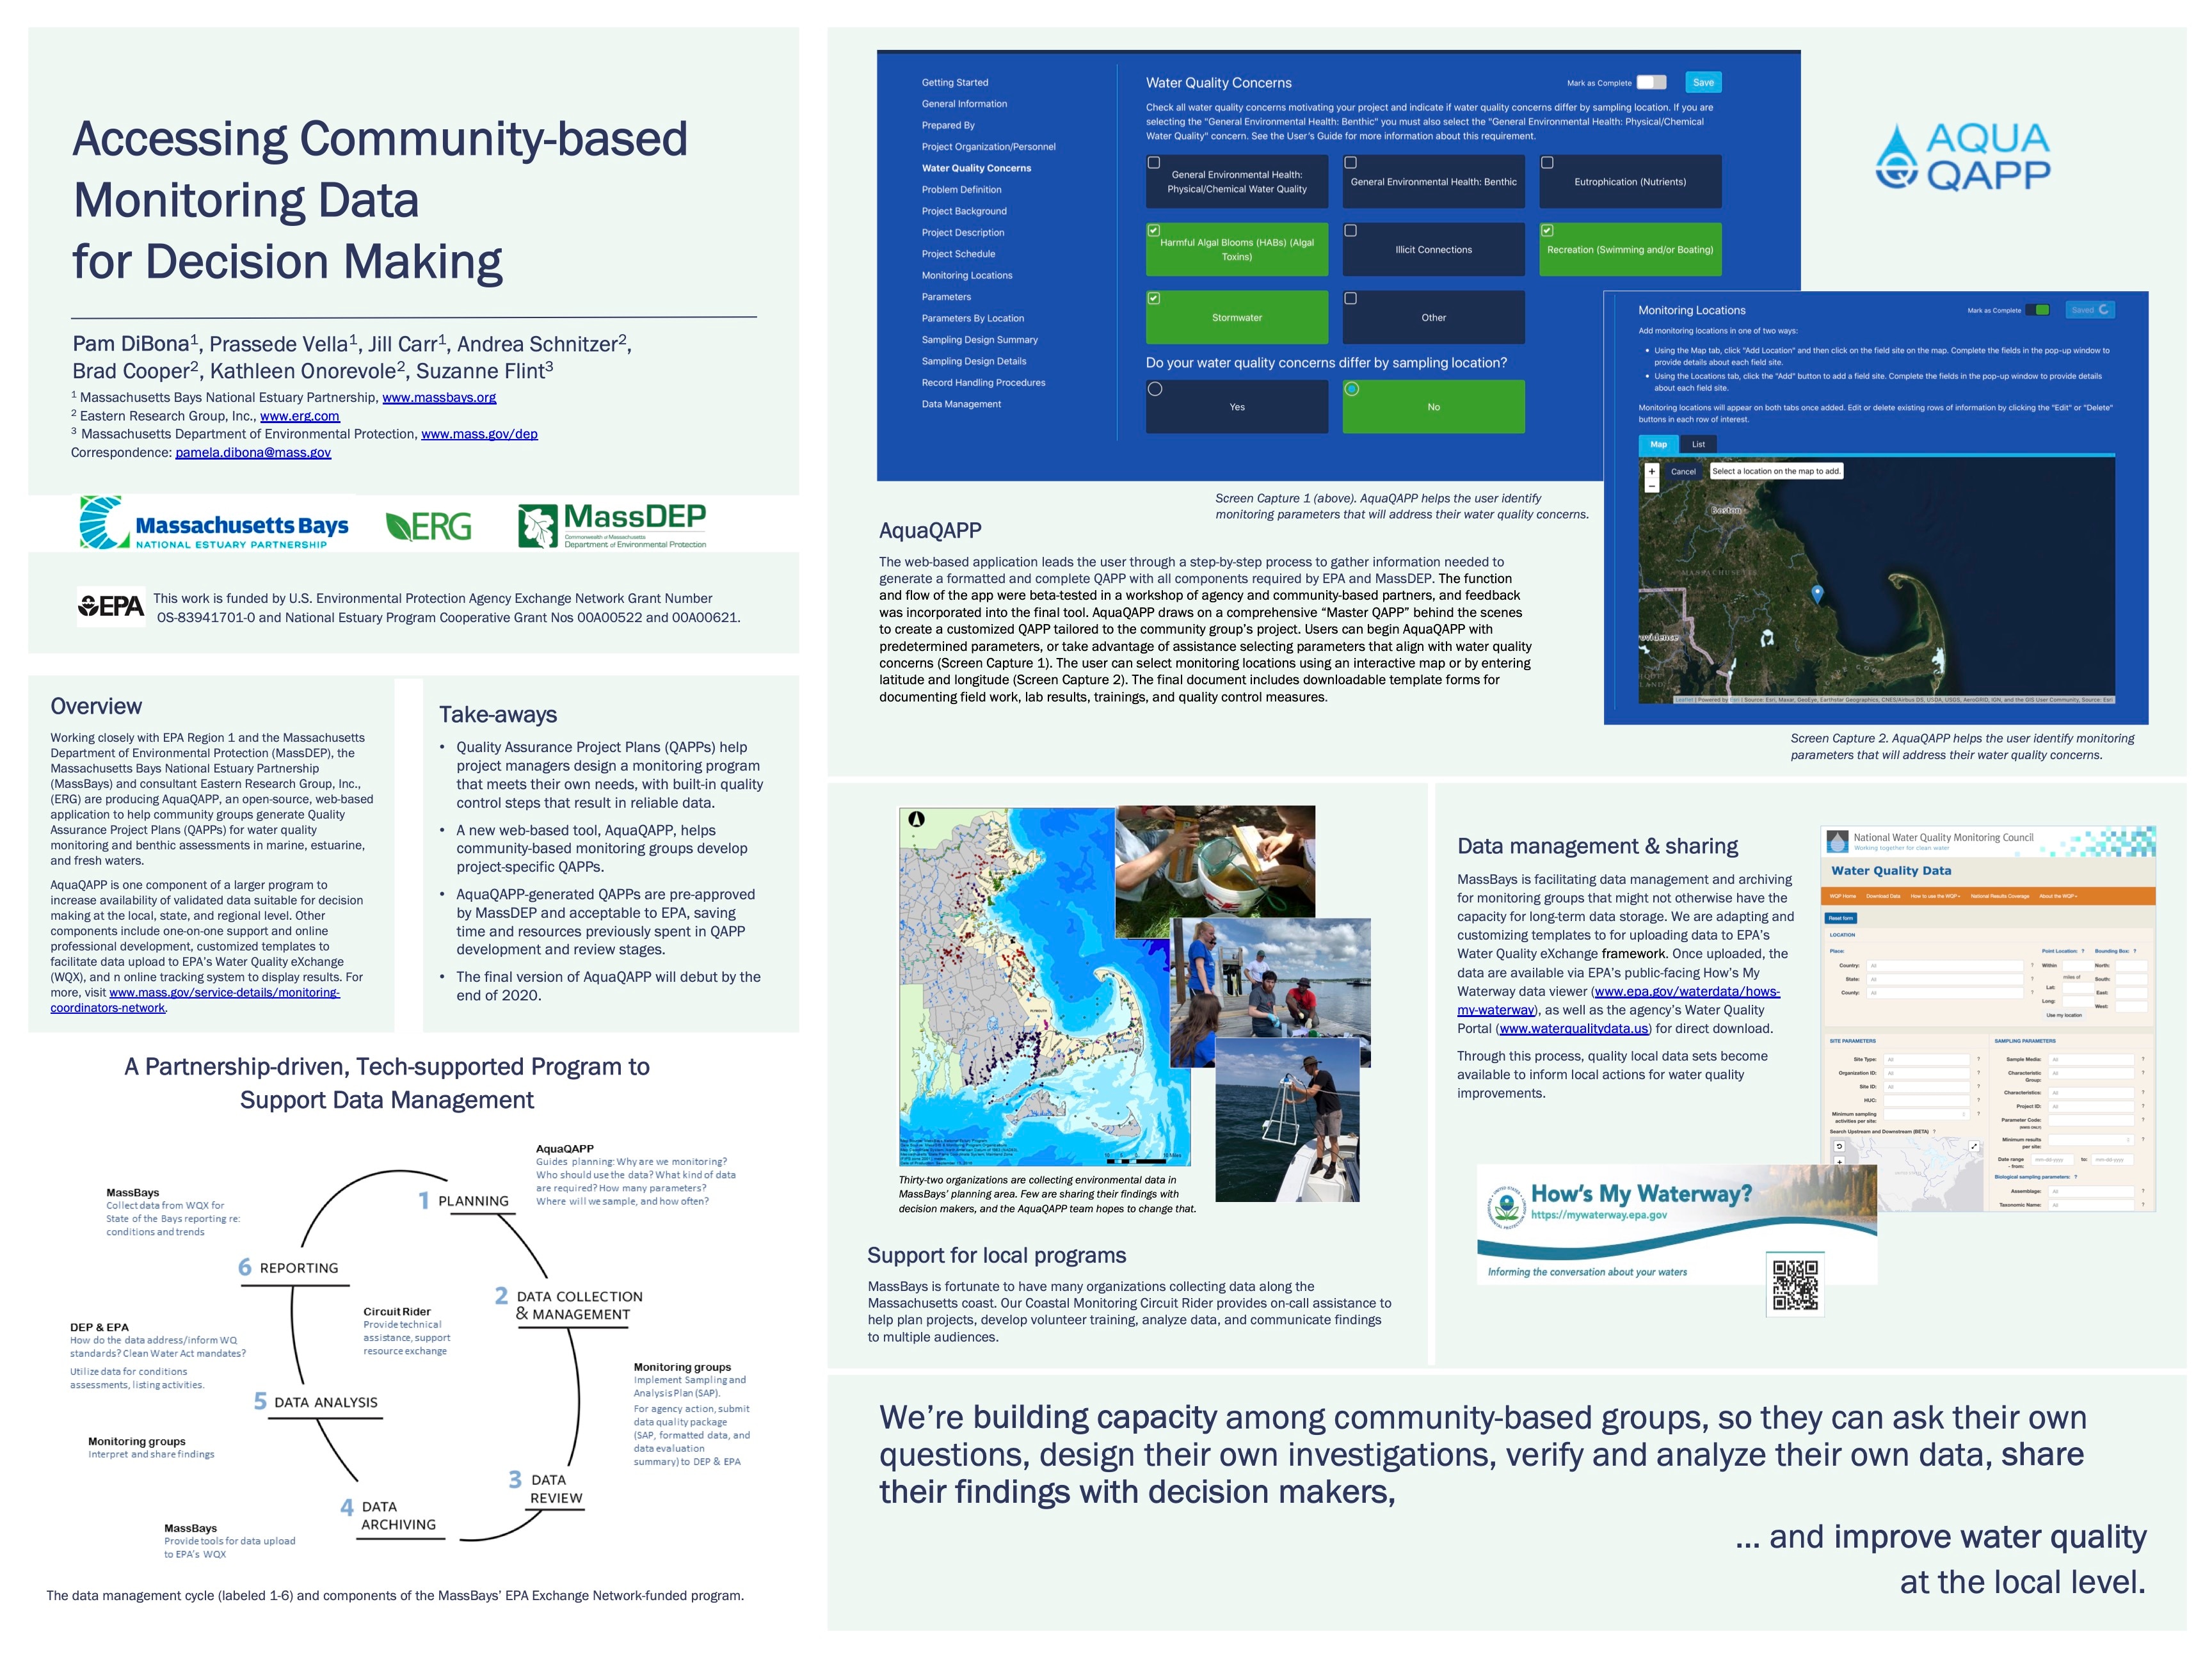 A photo of a poster containing details about "Accessing Citizen Science Data for Environmental Decisionmaking," the project described on this page.